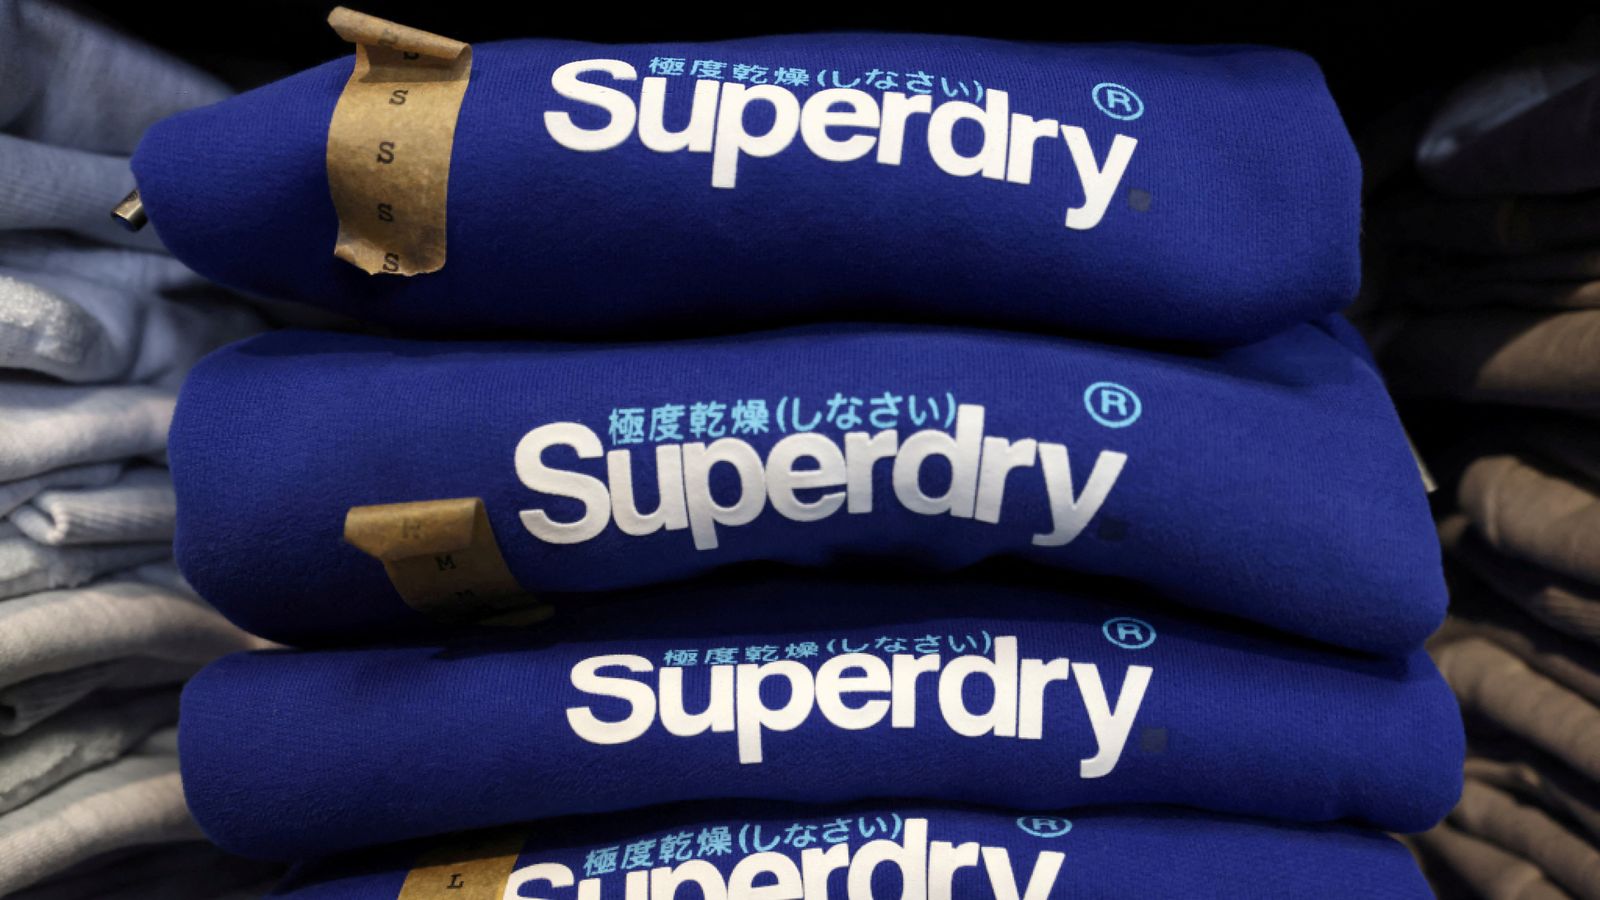 Superdry profit warning sends shares to record low